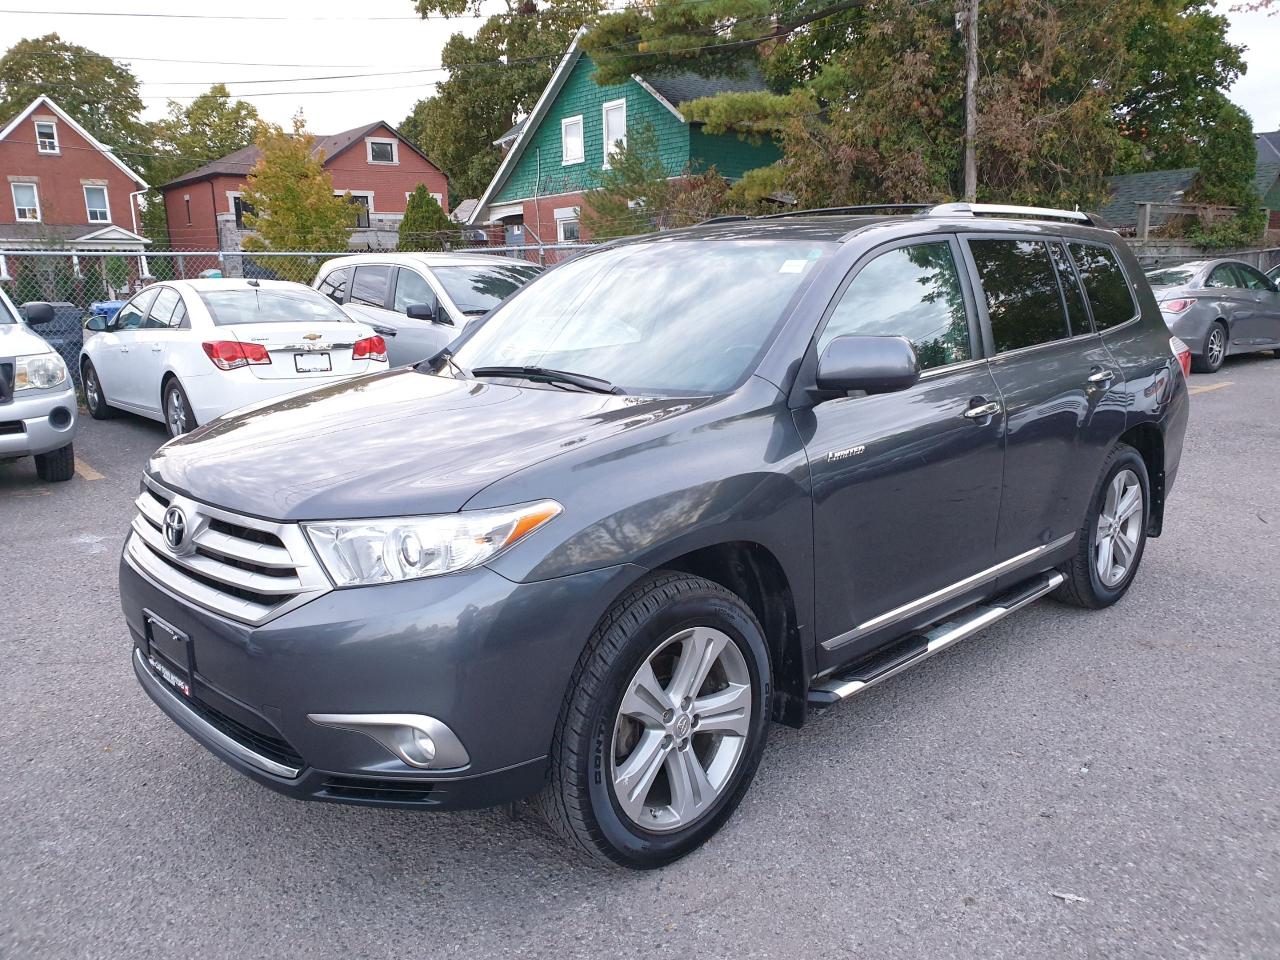 Used 2012 Toyota Highlander Limited For Sale In Brampton